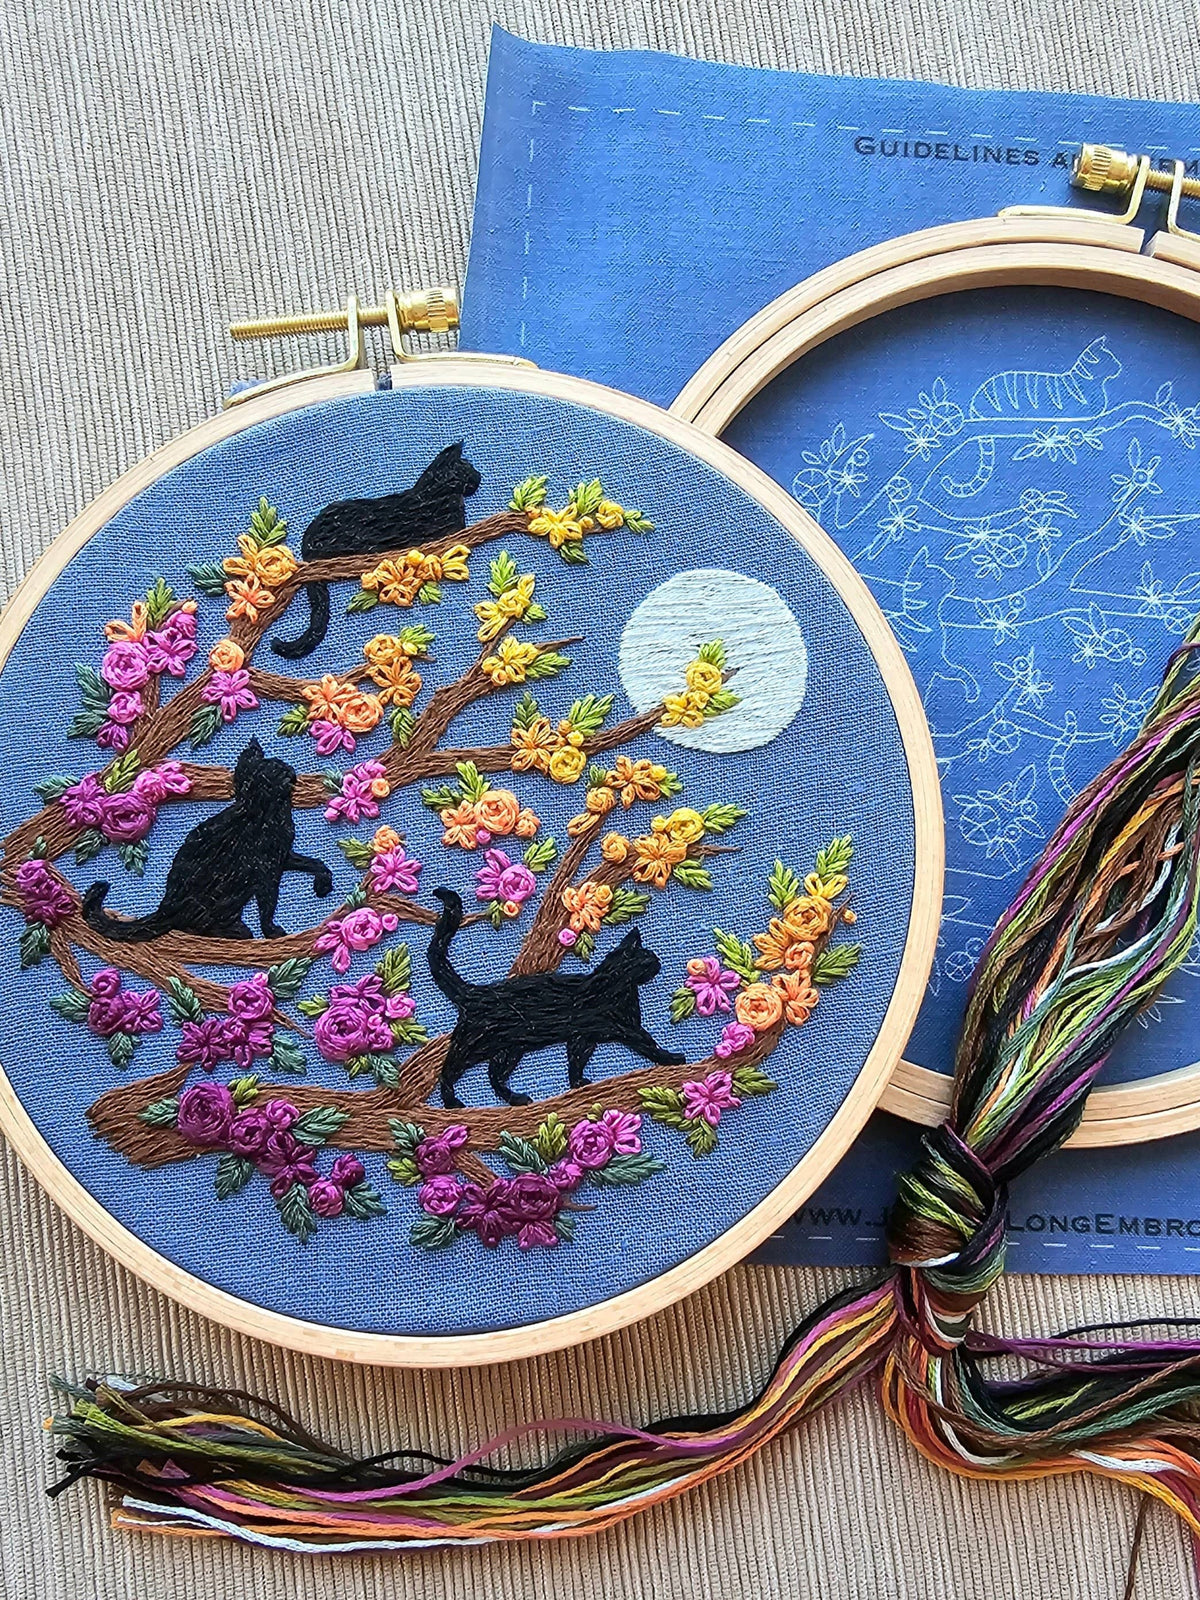 Jessica Long Embroidery Embroidery Kit Black Cats & Full Moon Embroidery Kit